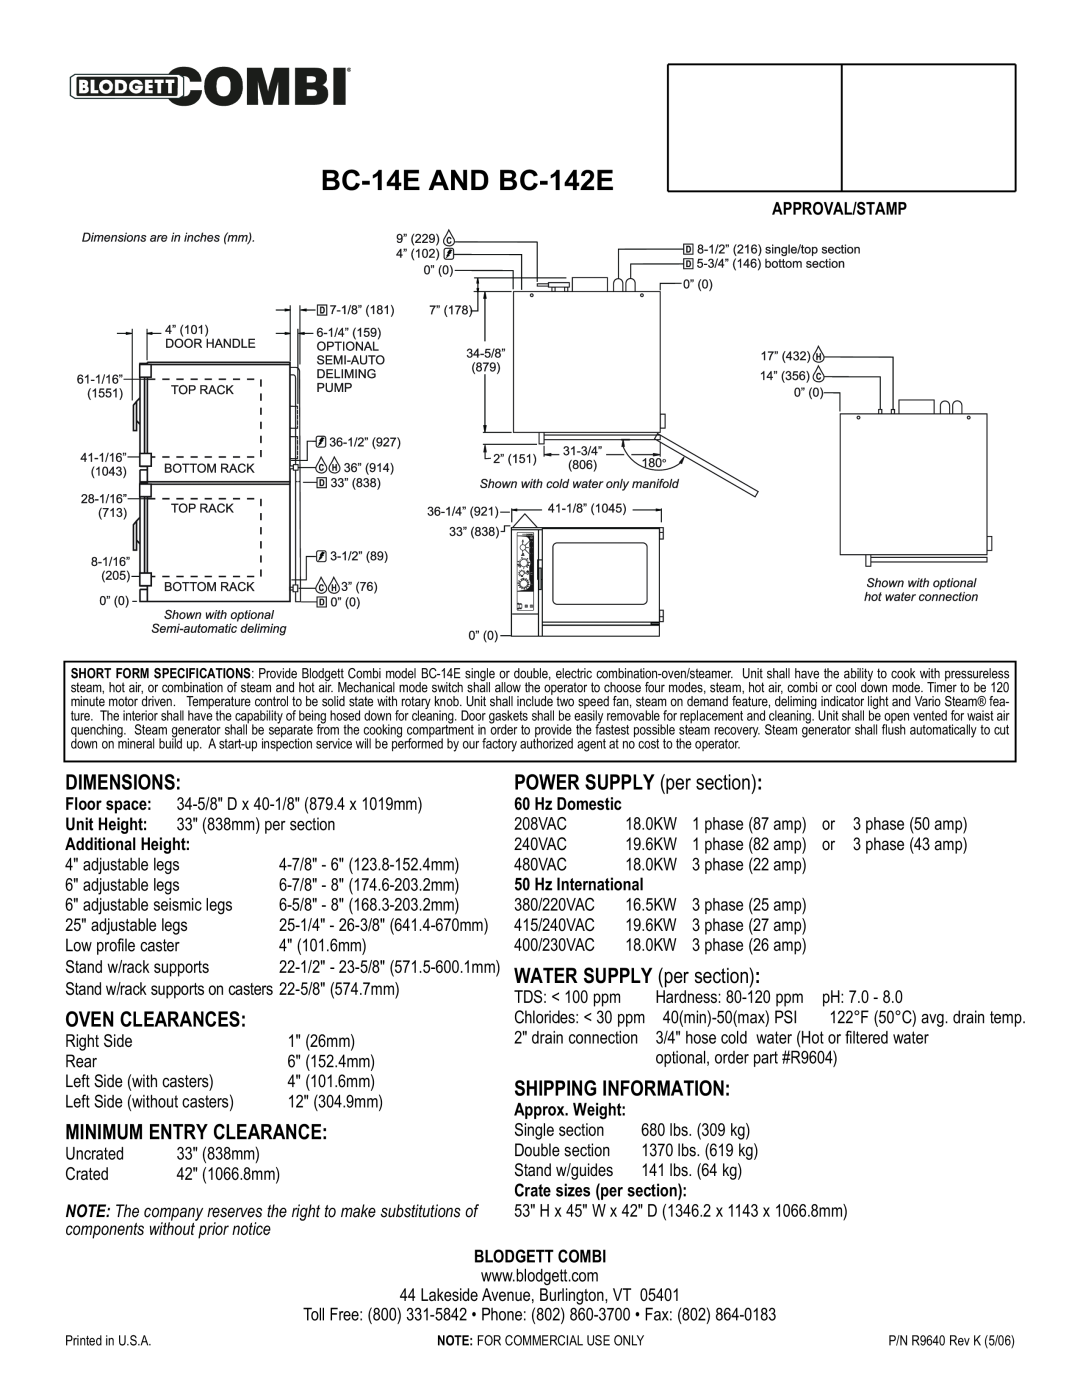 Blodgett BC-14E Dimensions, POWER SUPPLY per section, WATER SUPPLY per section, Oven Clearances, Shipping Information 